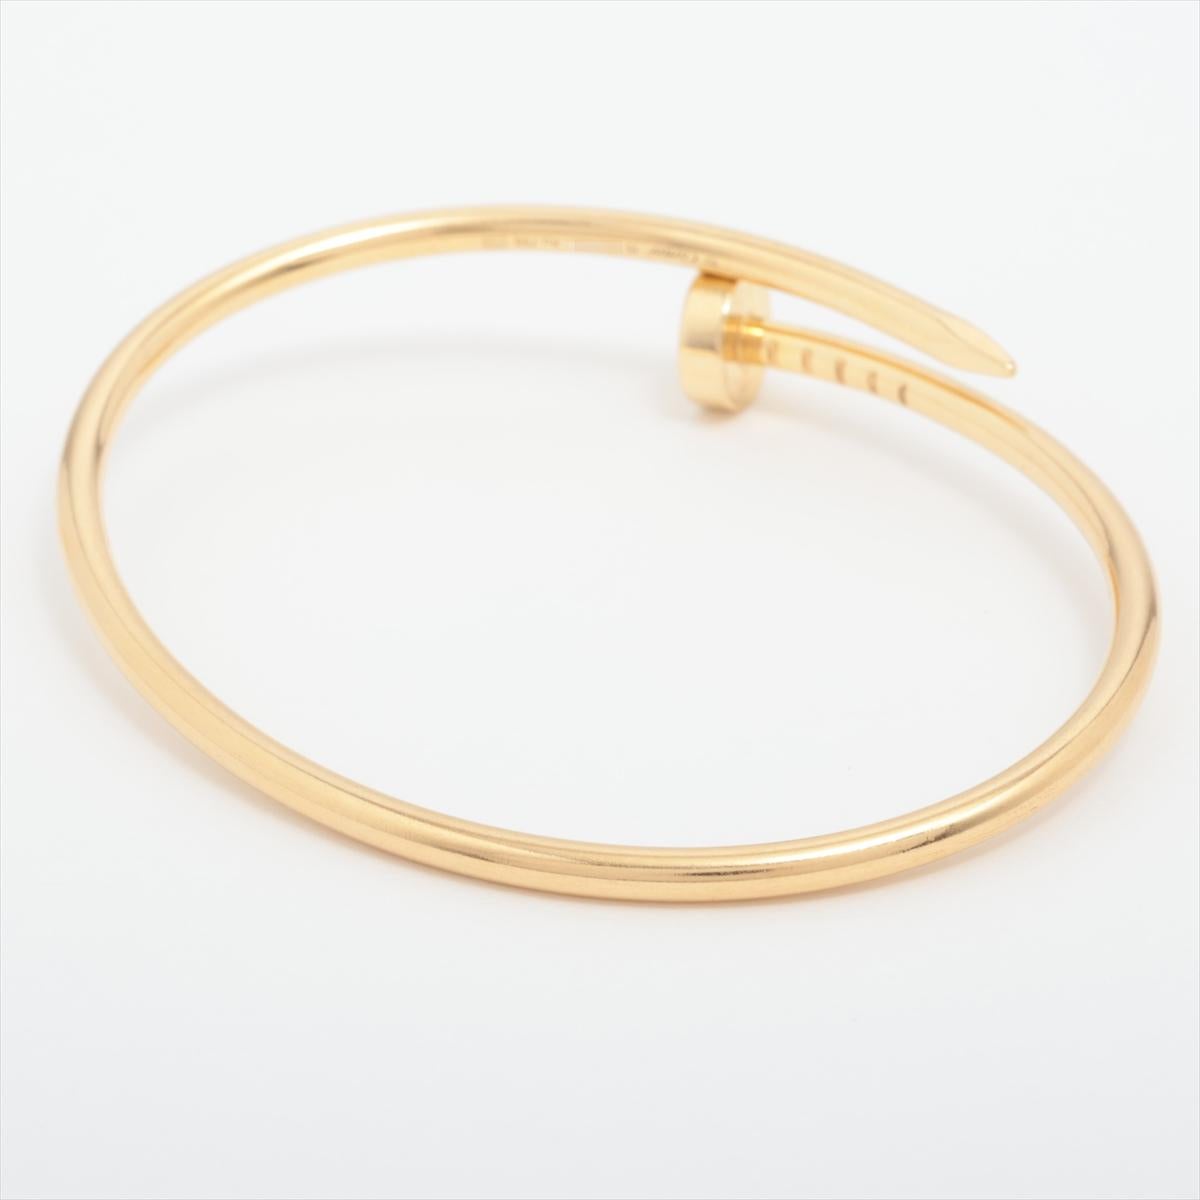 Cartier Juste un Clou SM Bracelet 750YG In Excellent Condition For Sale In Oyster Bay, NY